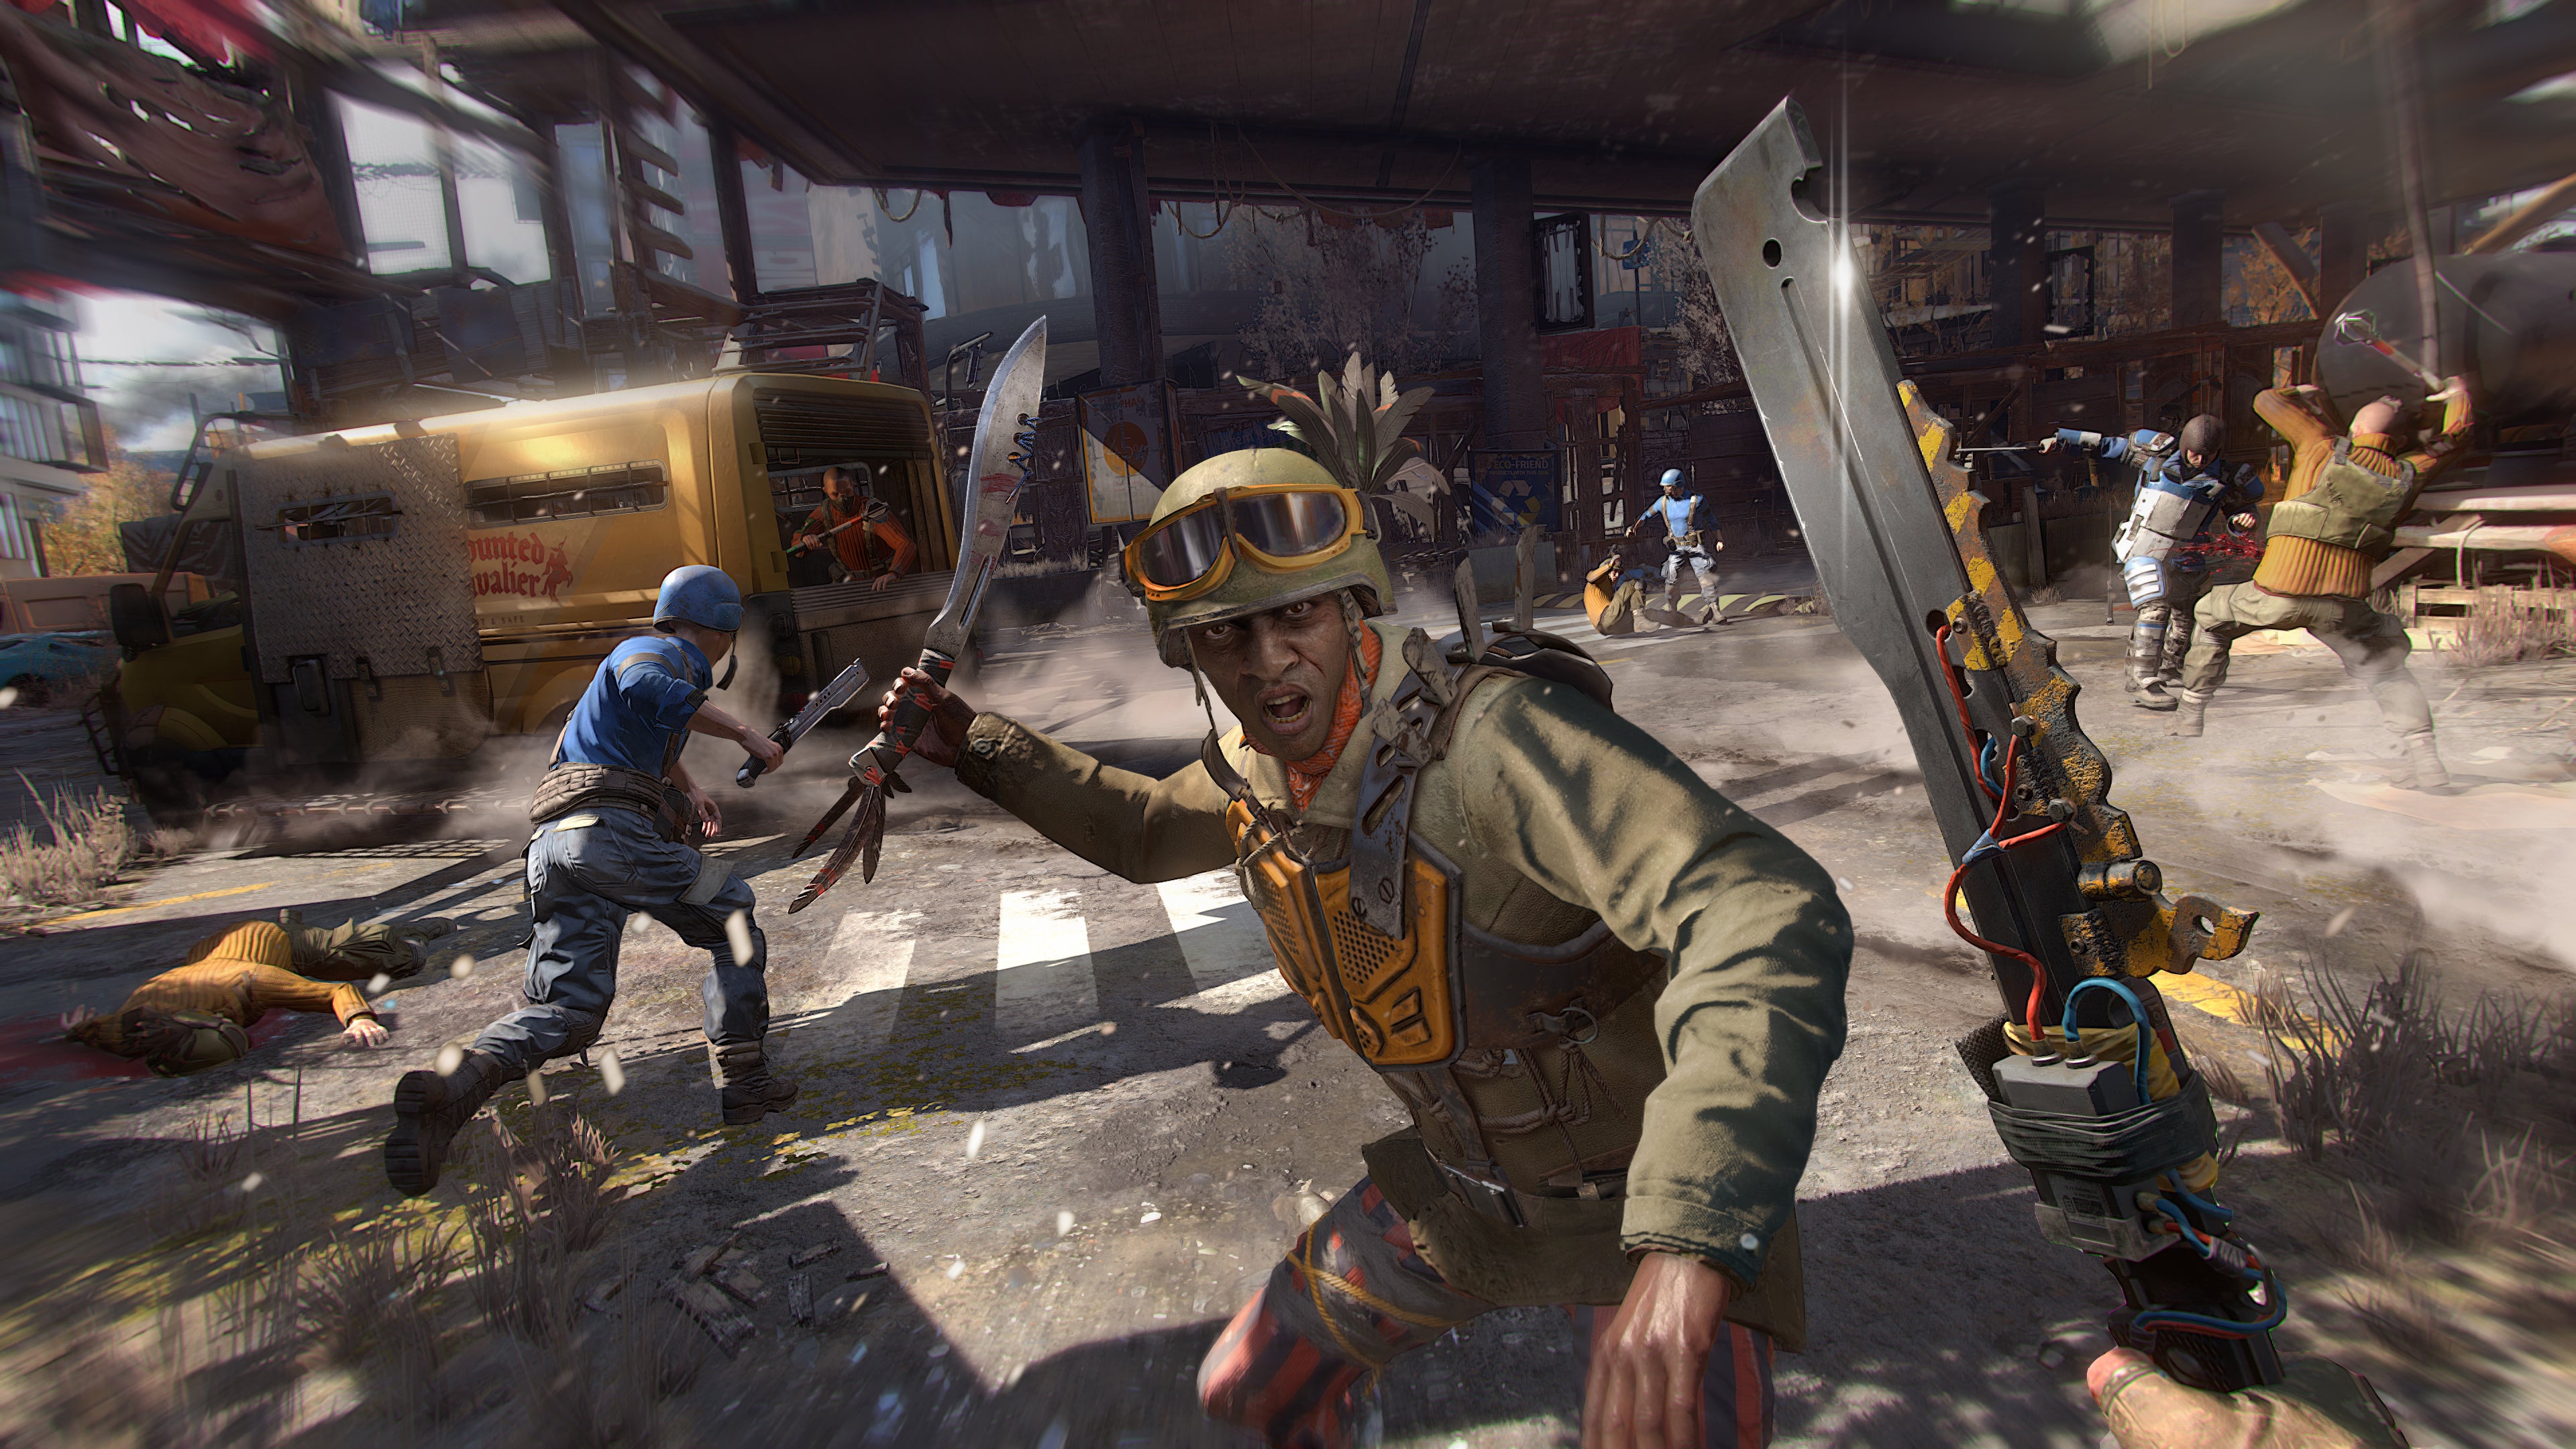 A knife duel in a Dying Light 2 screenshot.